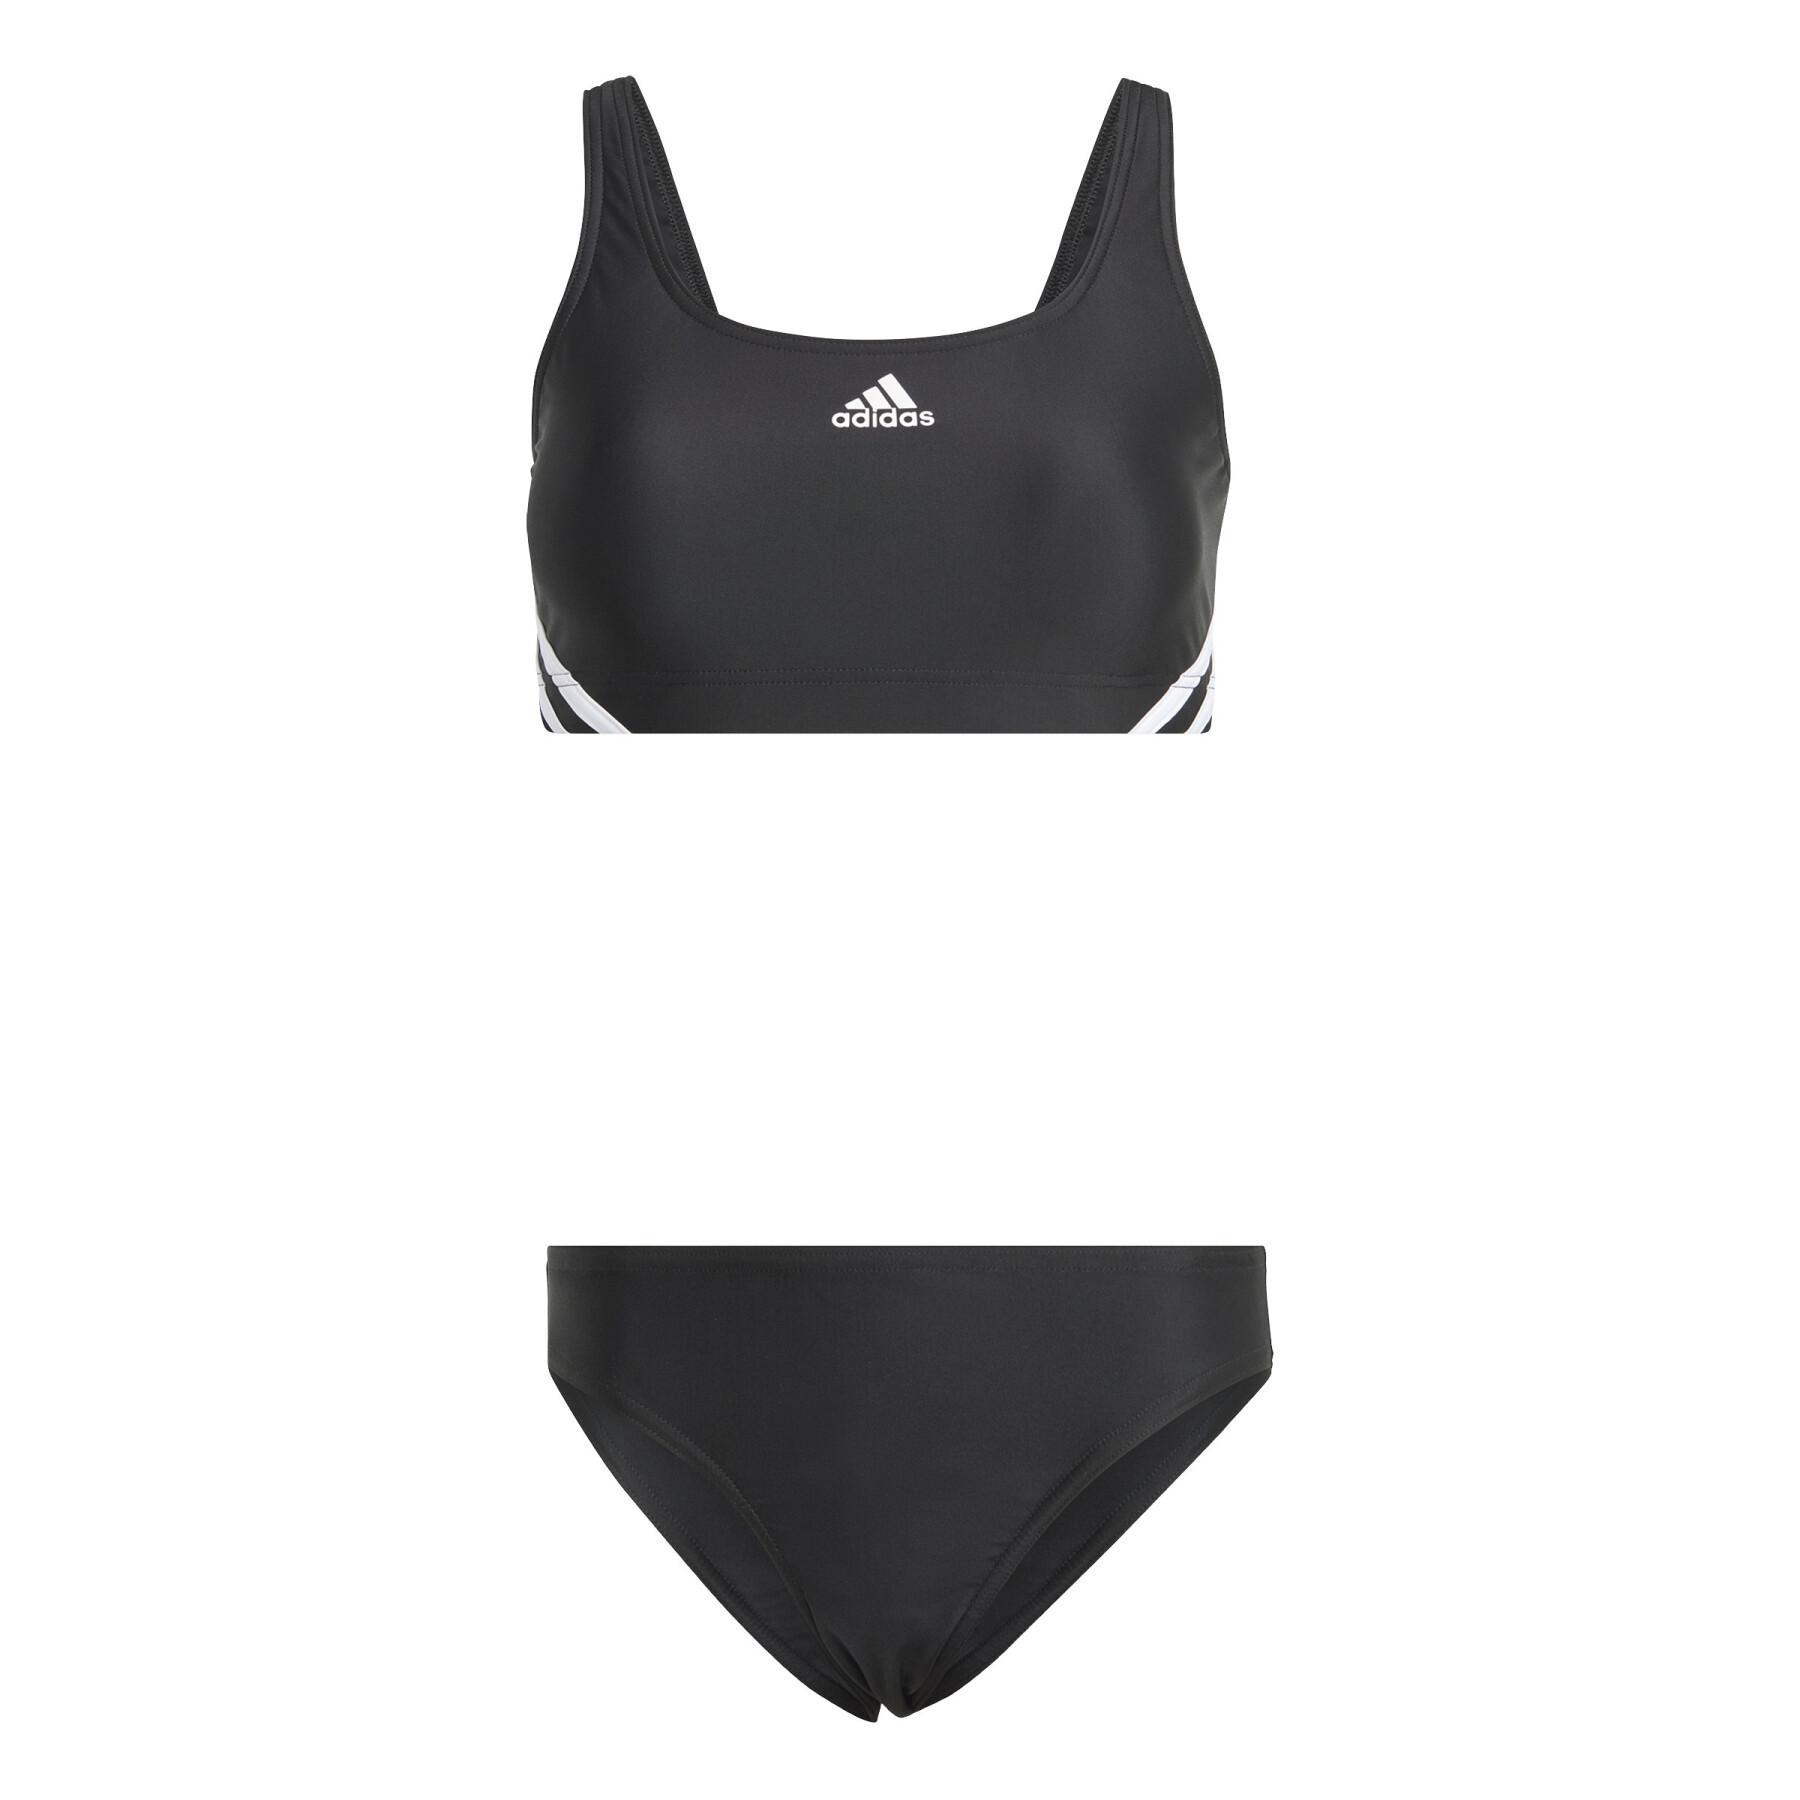 https://media.madeinparadis.com/catalog/product/cache/image/1800x/9df78eab33525d08d6e5fb8d27136e95/a/d/adidas_ib5985_1_apparel_photography_front_view_white.jpg